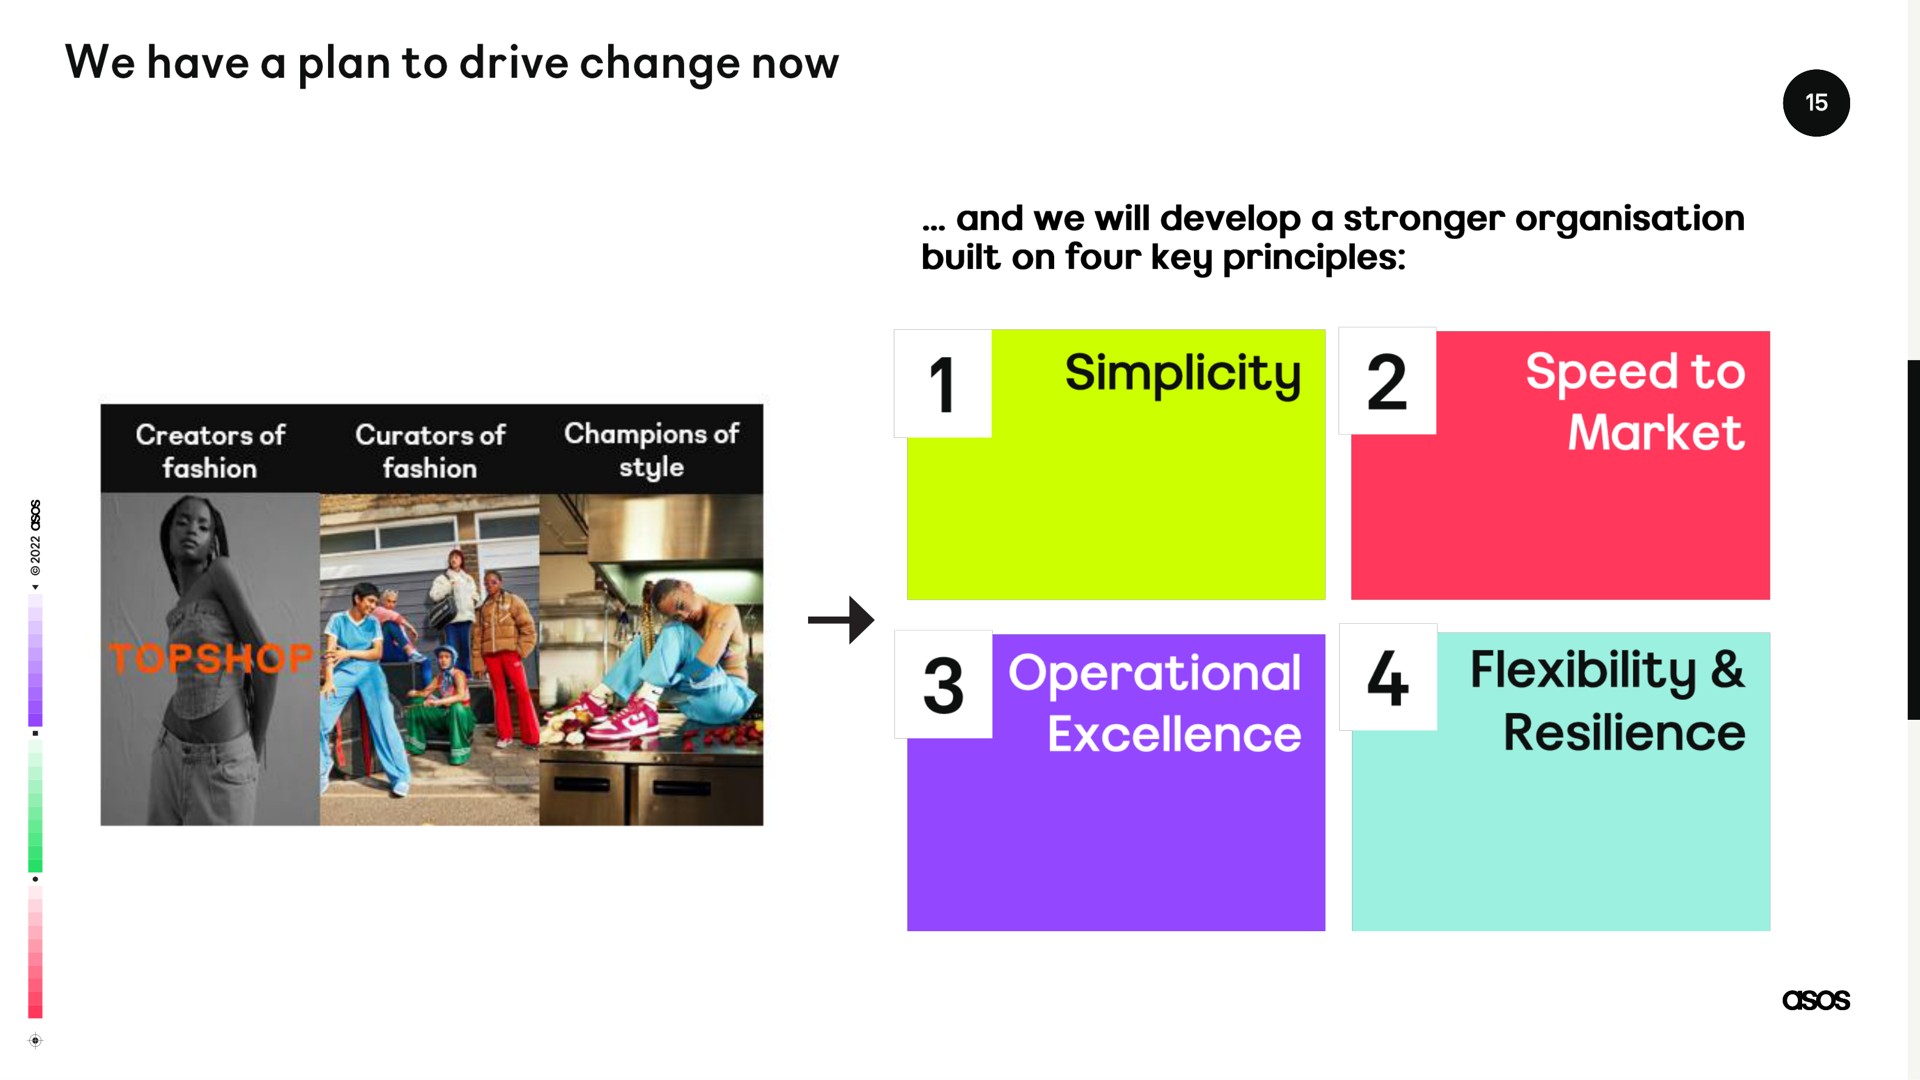 we have a plan to drive change now simplicity market speed to excellence flexibility resilience | Asos